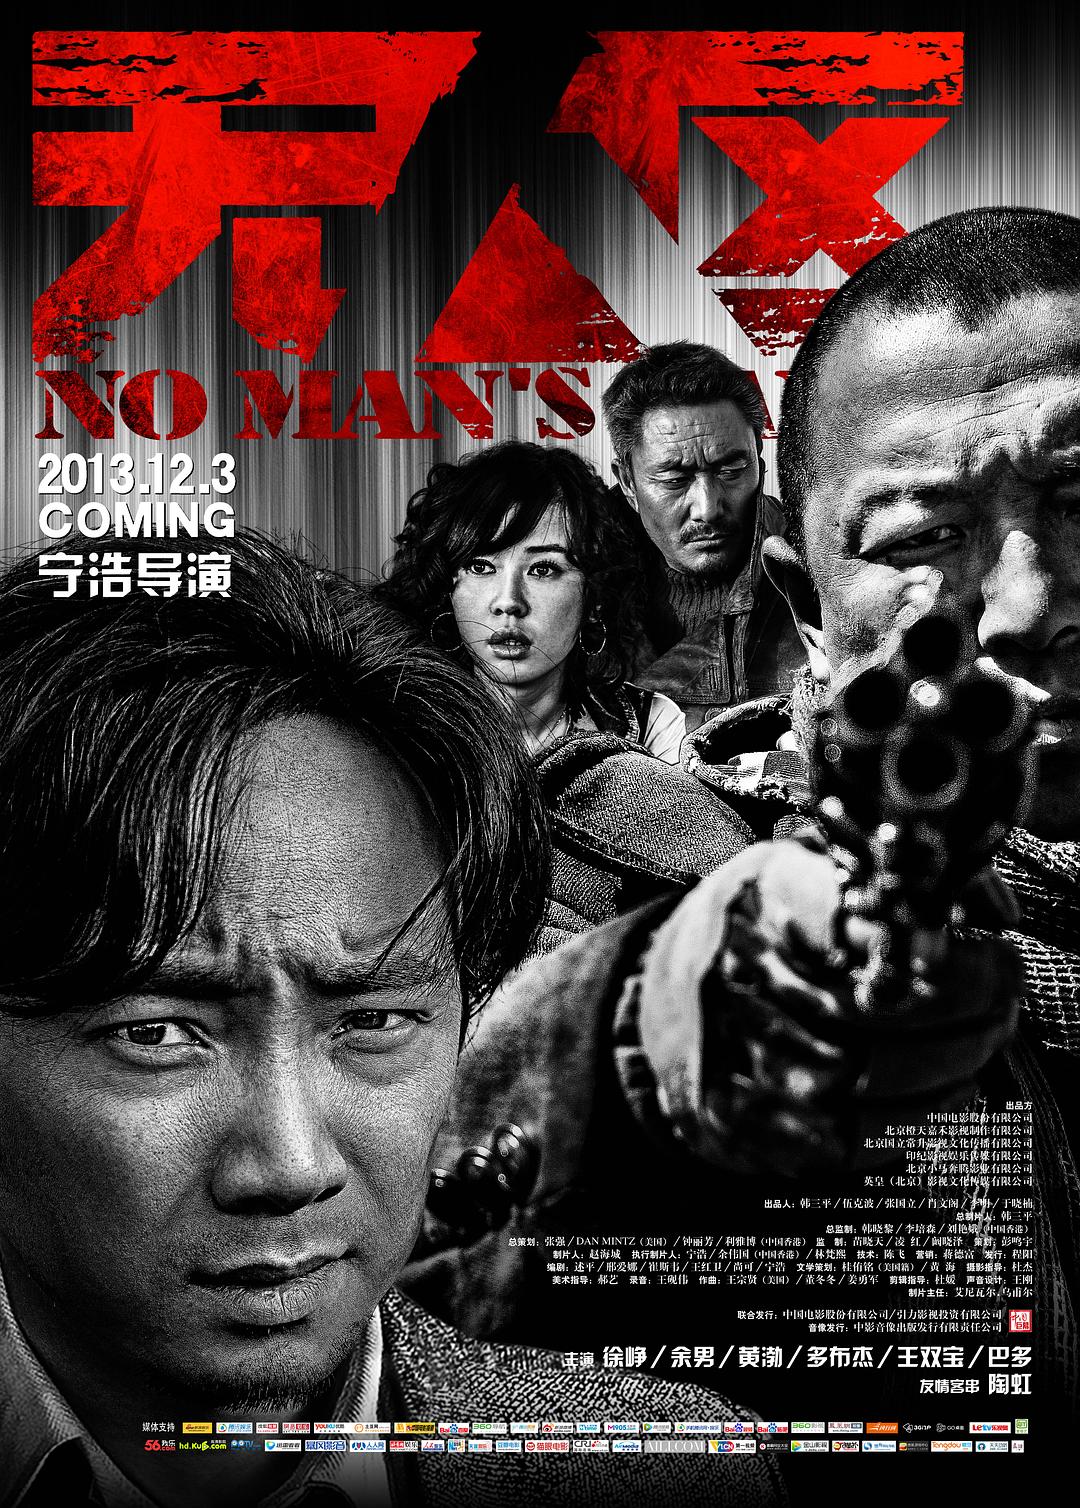  No.Mans.Land.2013.CHINESE.1080p.BluRay.x264.DTS-WiKi 15.53GB-1.png